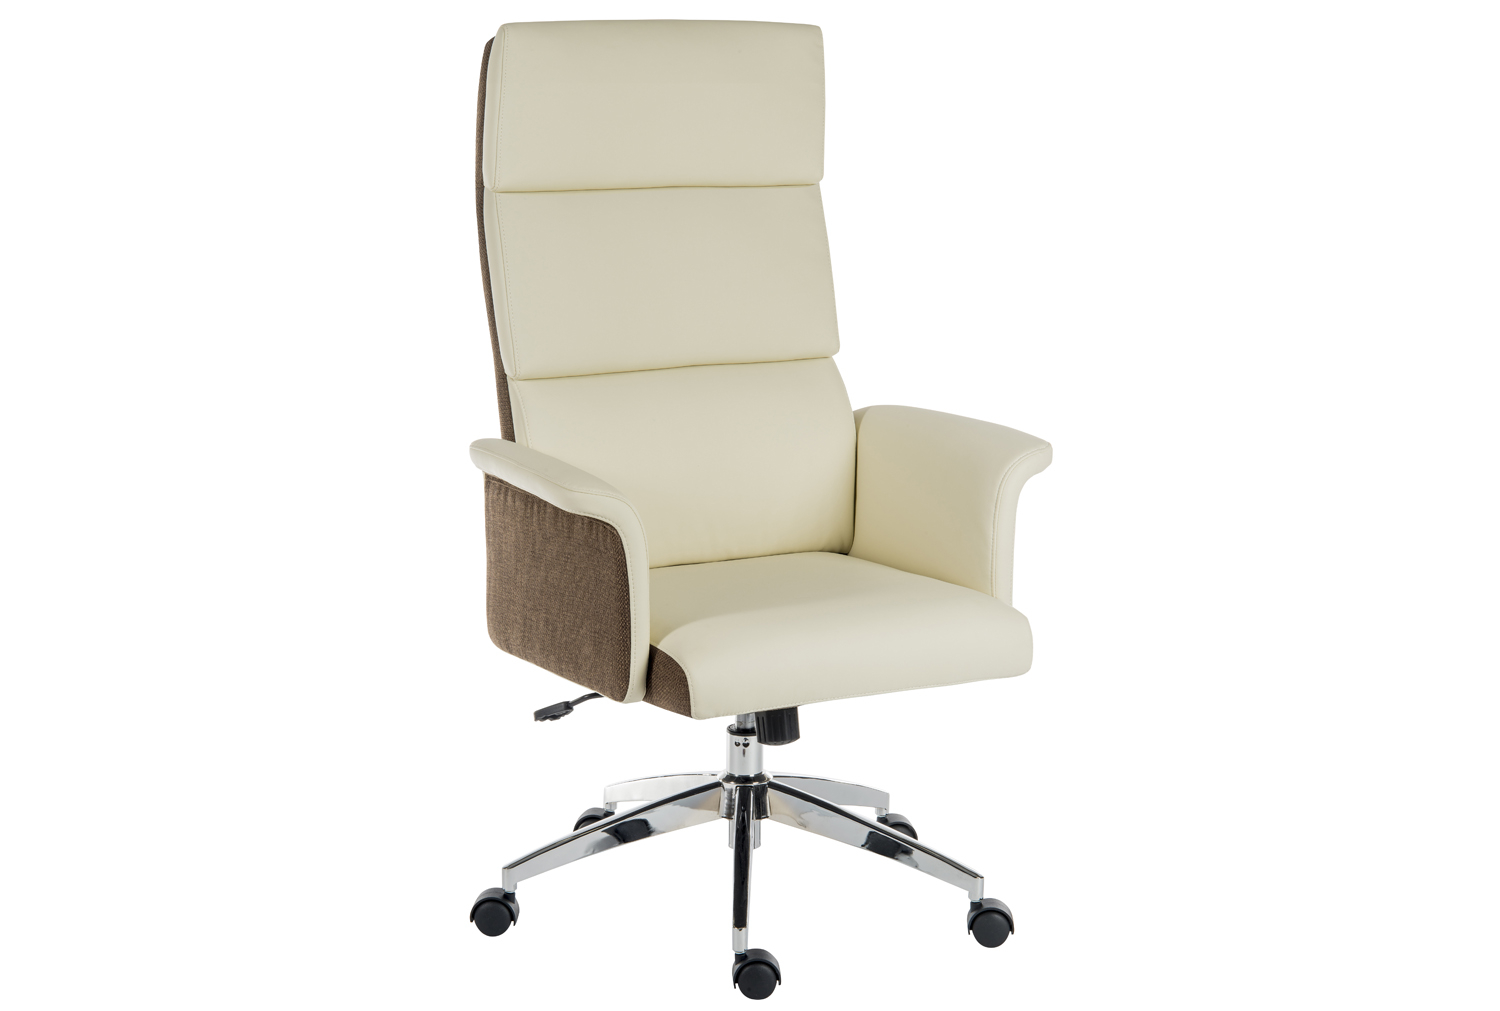 Panache High Back Executive Leather Look Office Chair Cream, Fully Installed